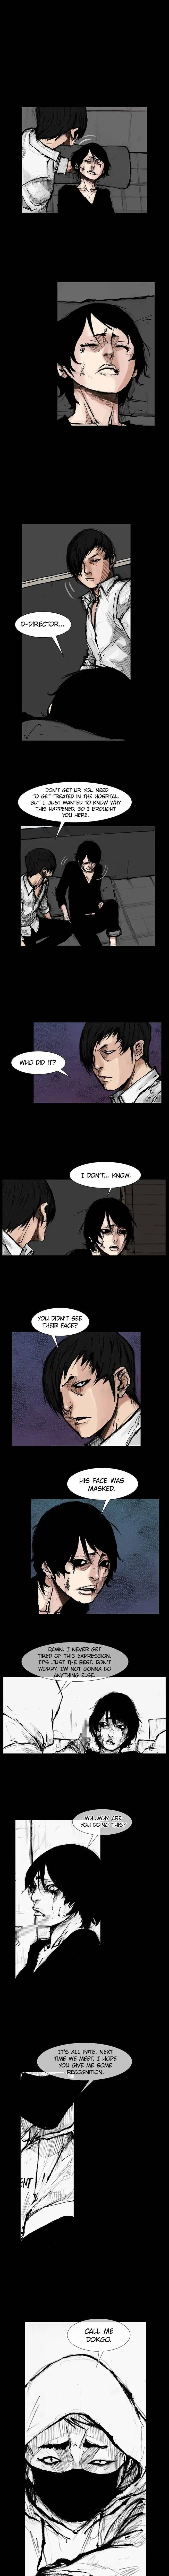 Dokgo 2 Chapter 58 Page 5